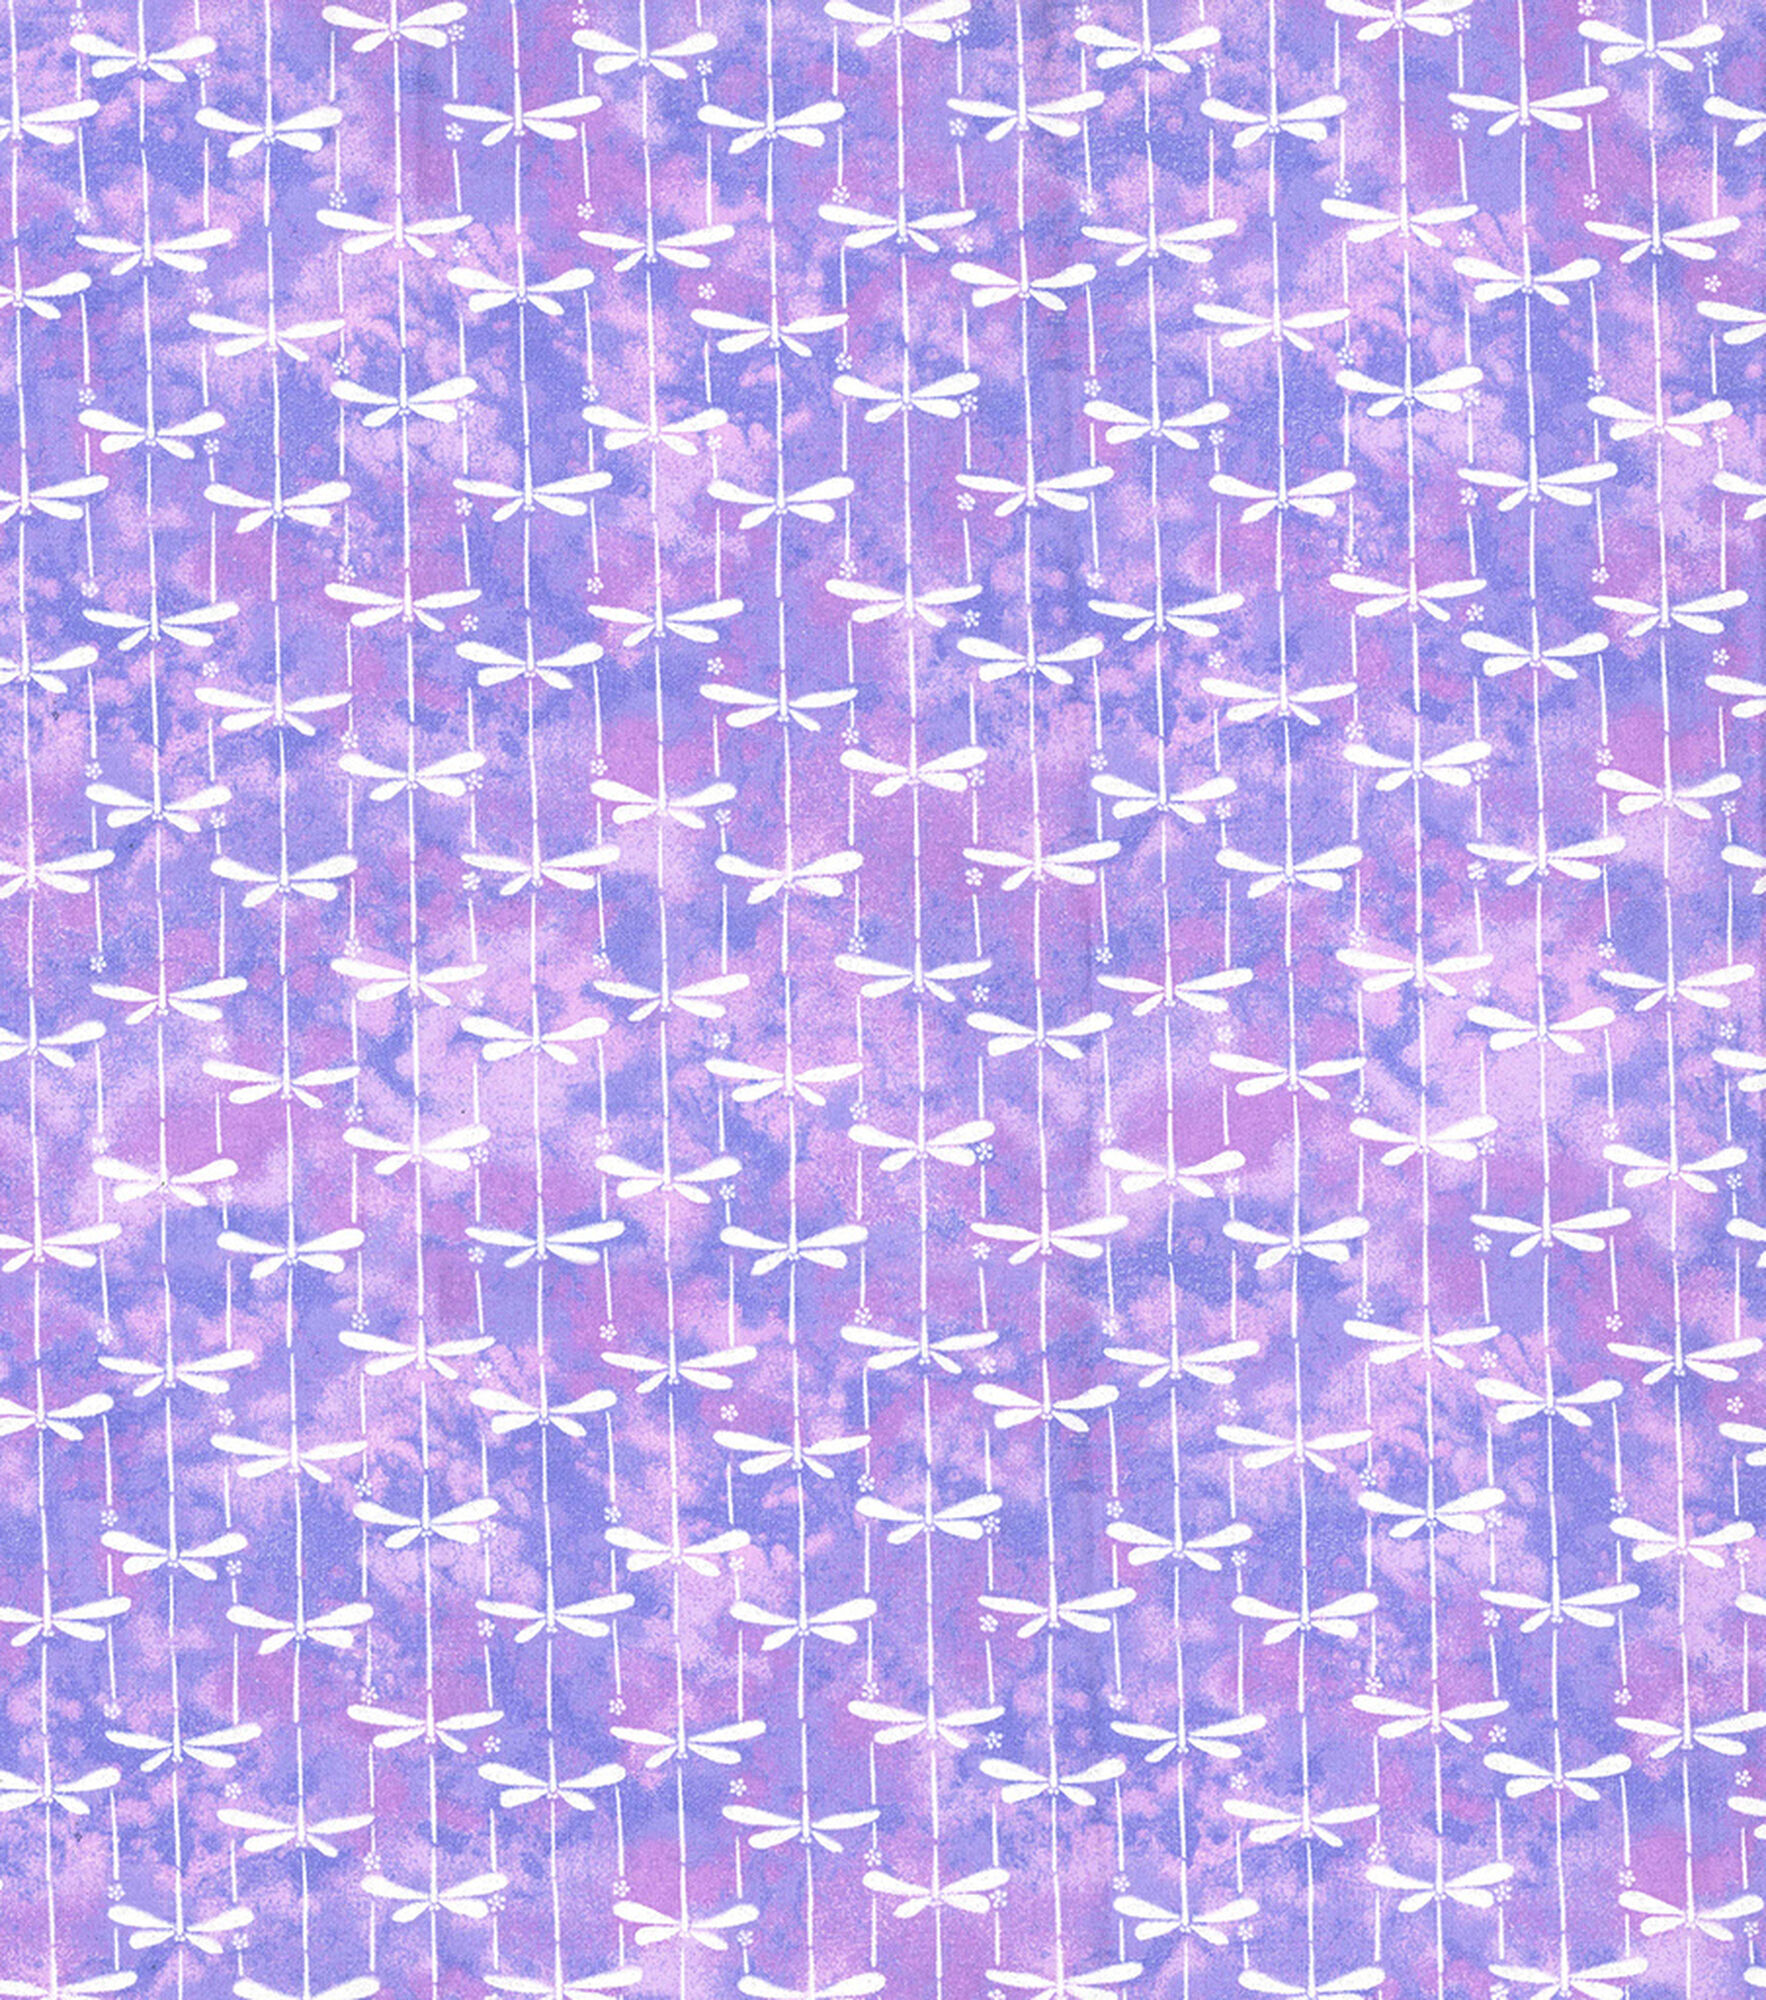 Fabric Traditions Untamed Dragonfly Cotton Fabric by Keepsake Calico, Purple, hi-res